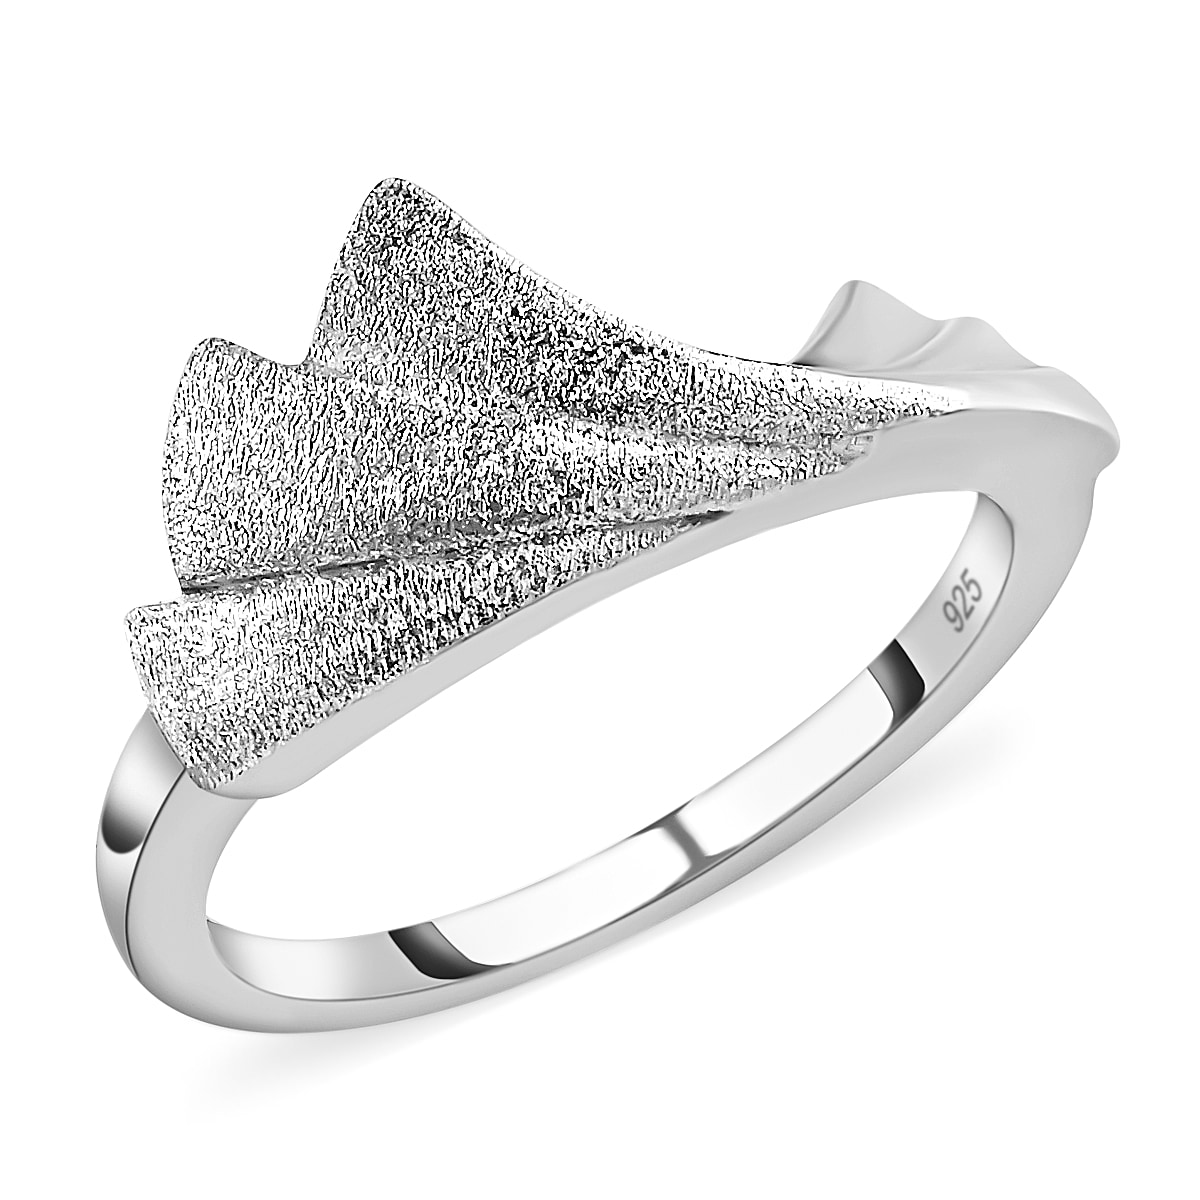 Karatcart Platinum Plated Elegant Heartbeat Adjustable Band Ring for Women  : Amazon.in: Jewellery